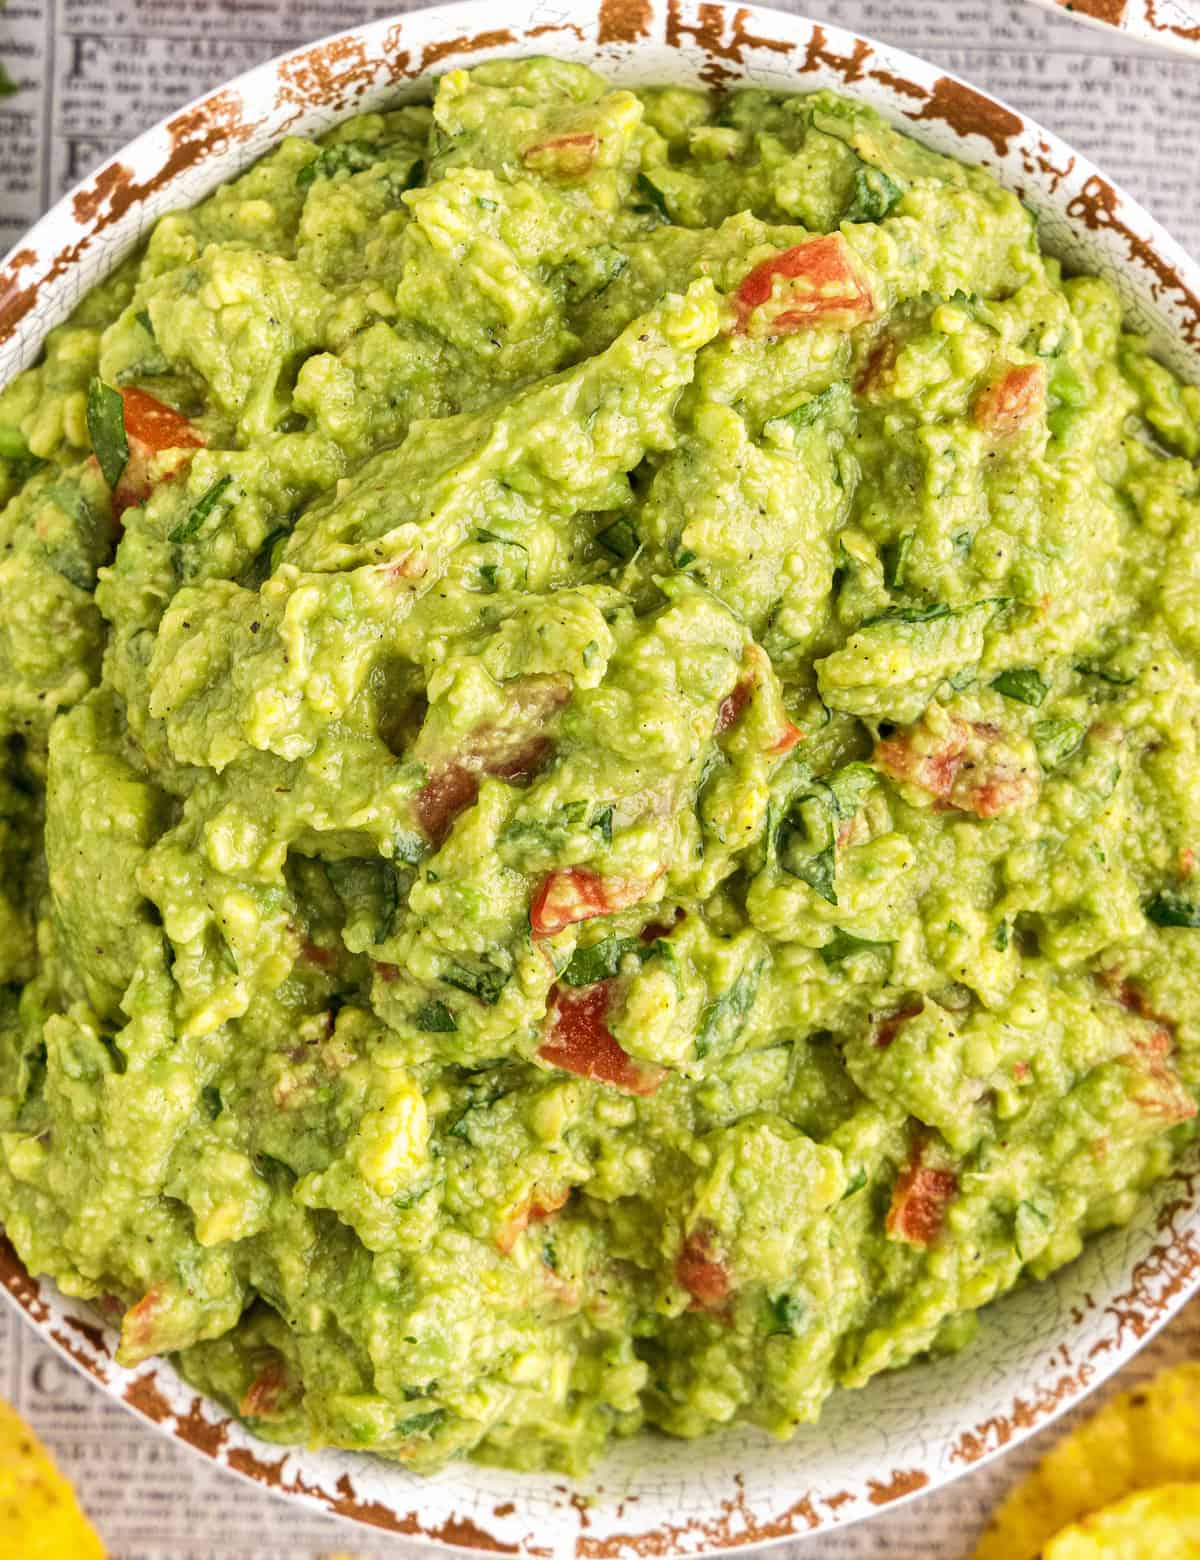 Don't reach for that container of pre-made guacamole, mix up this easy and classic guacamole recipe in no time! Made with simple ingredients, this dip comes together quickly and is a party staple. Put out a bowl with some chips, and watch it disappear!